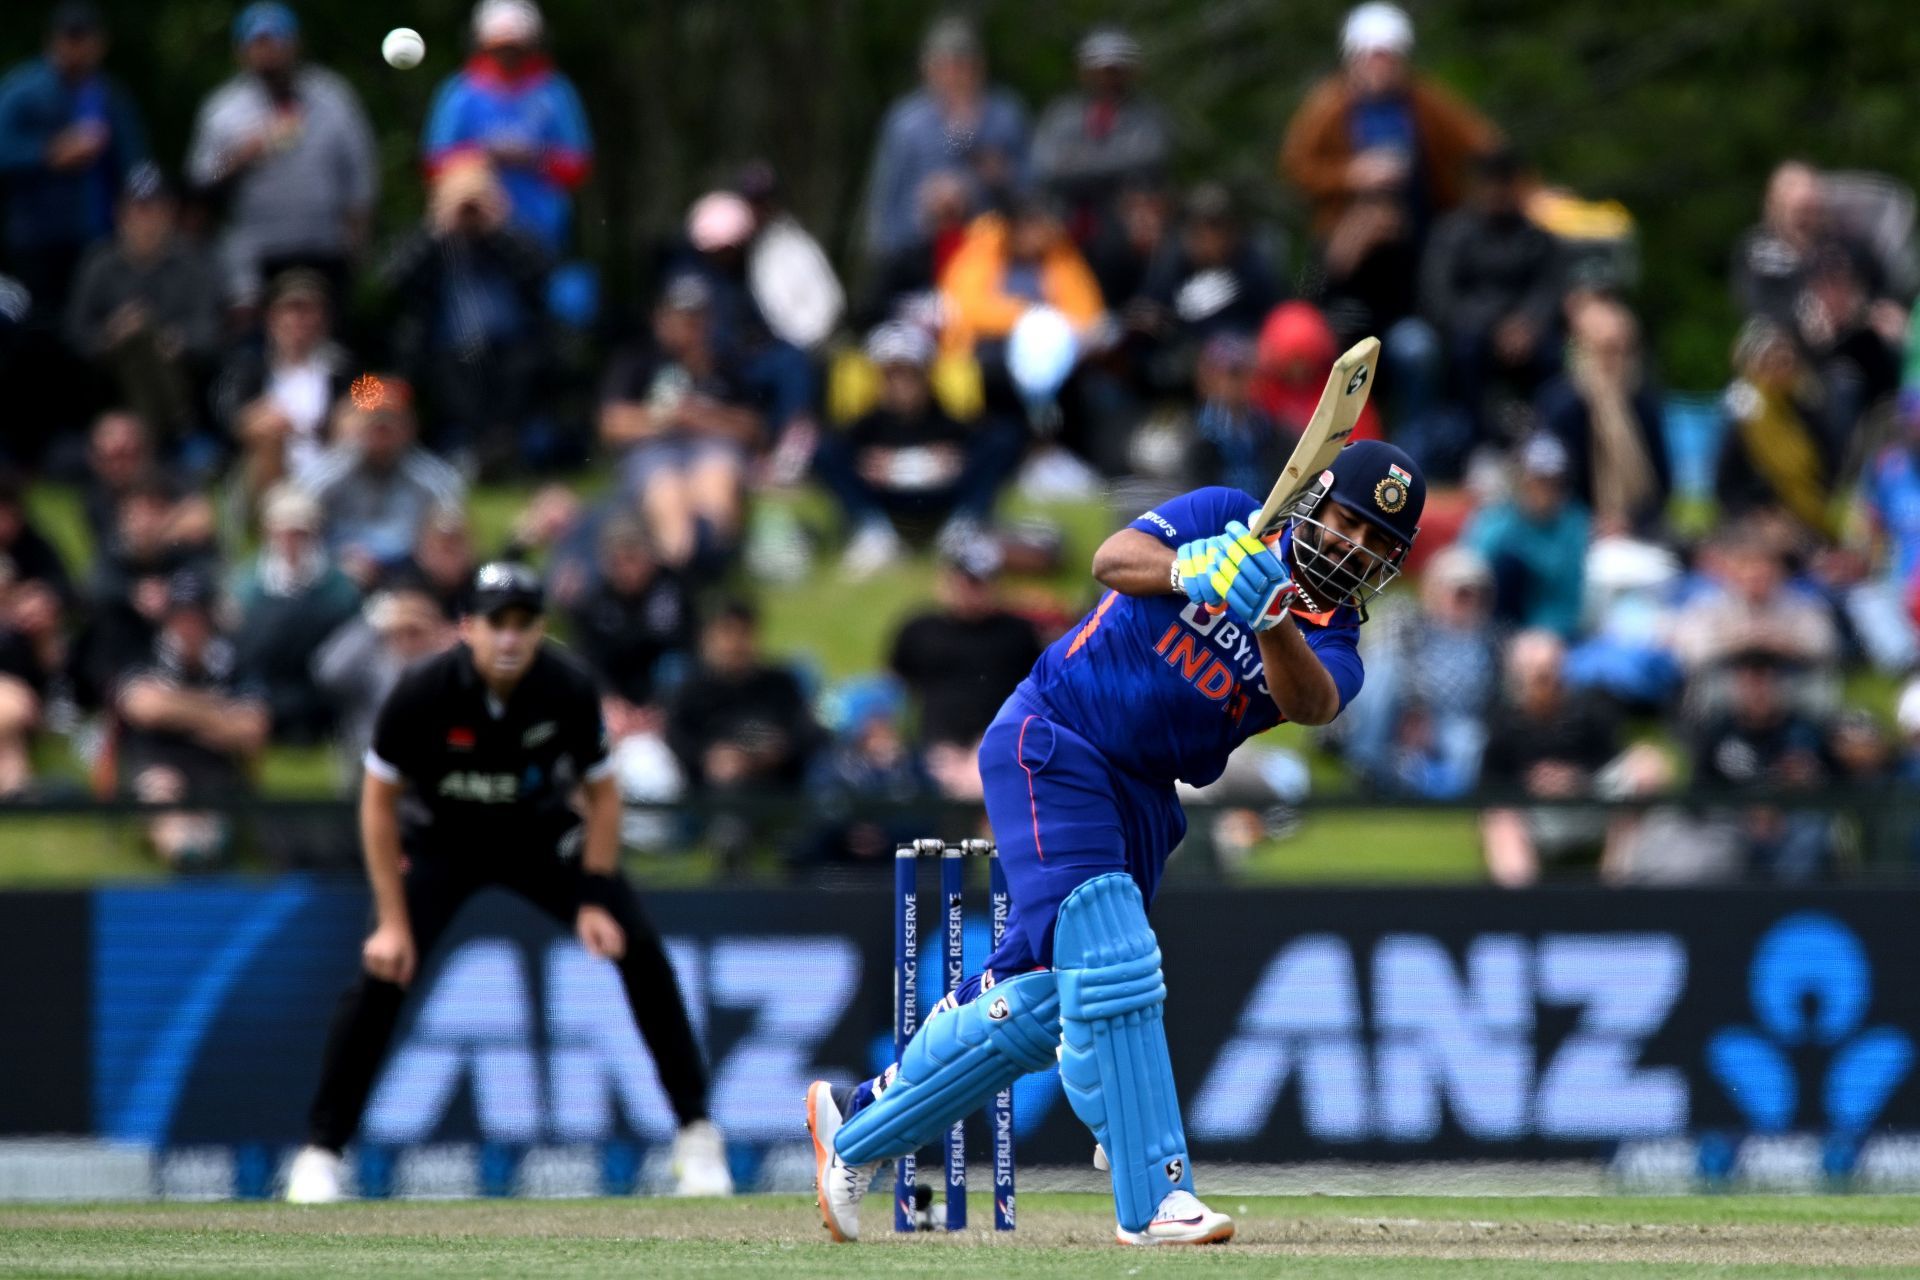 Can Rishabh Pant rediscover his form? Pic: Getty Images